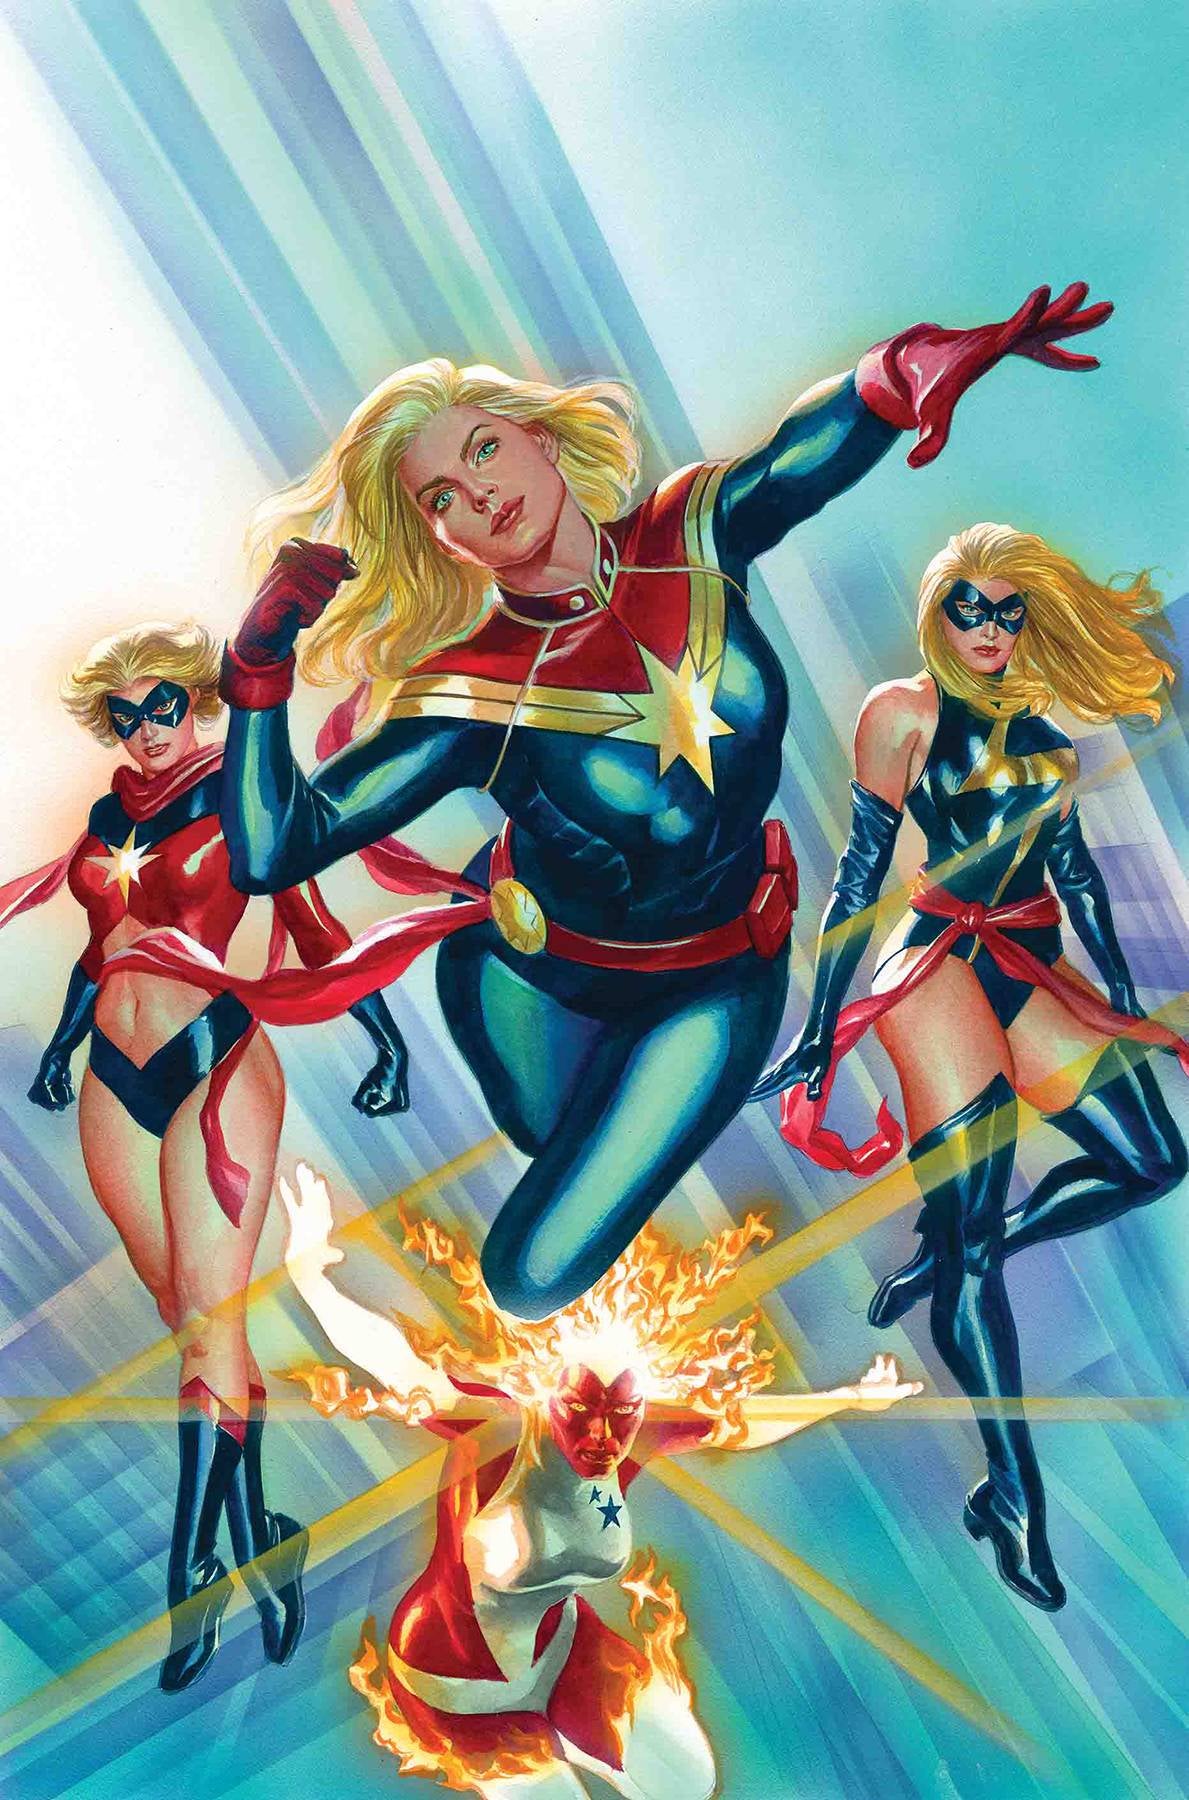 CAPTAIN MARVEL POSTER #1 BY ALEX ROSS